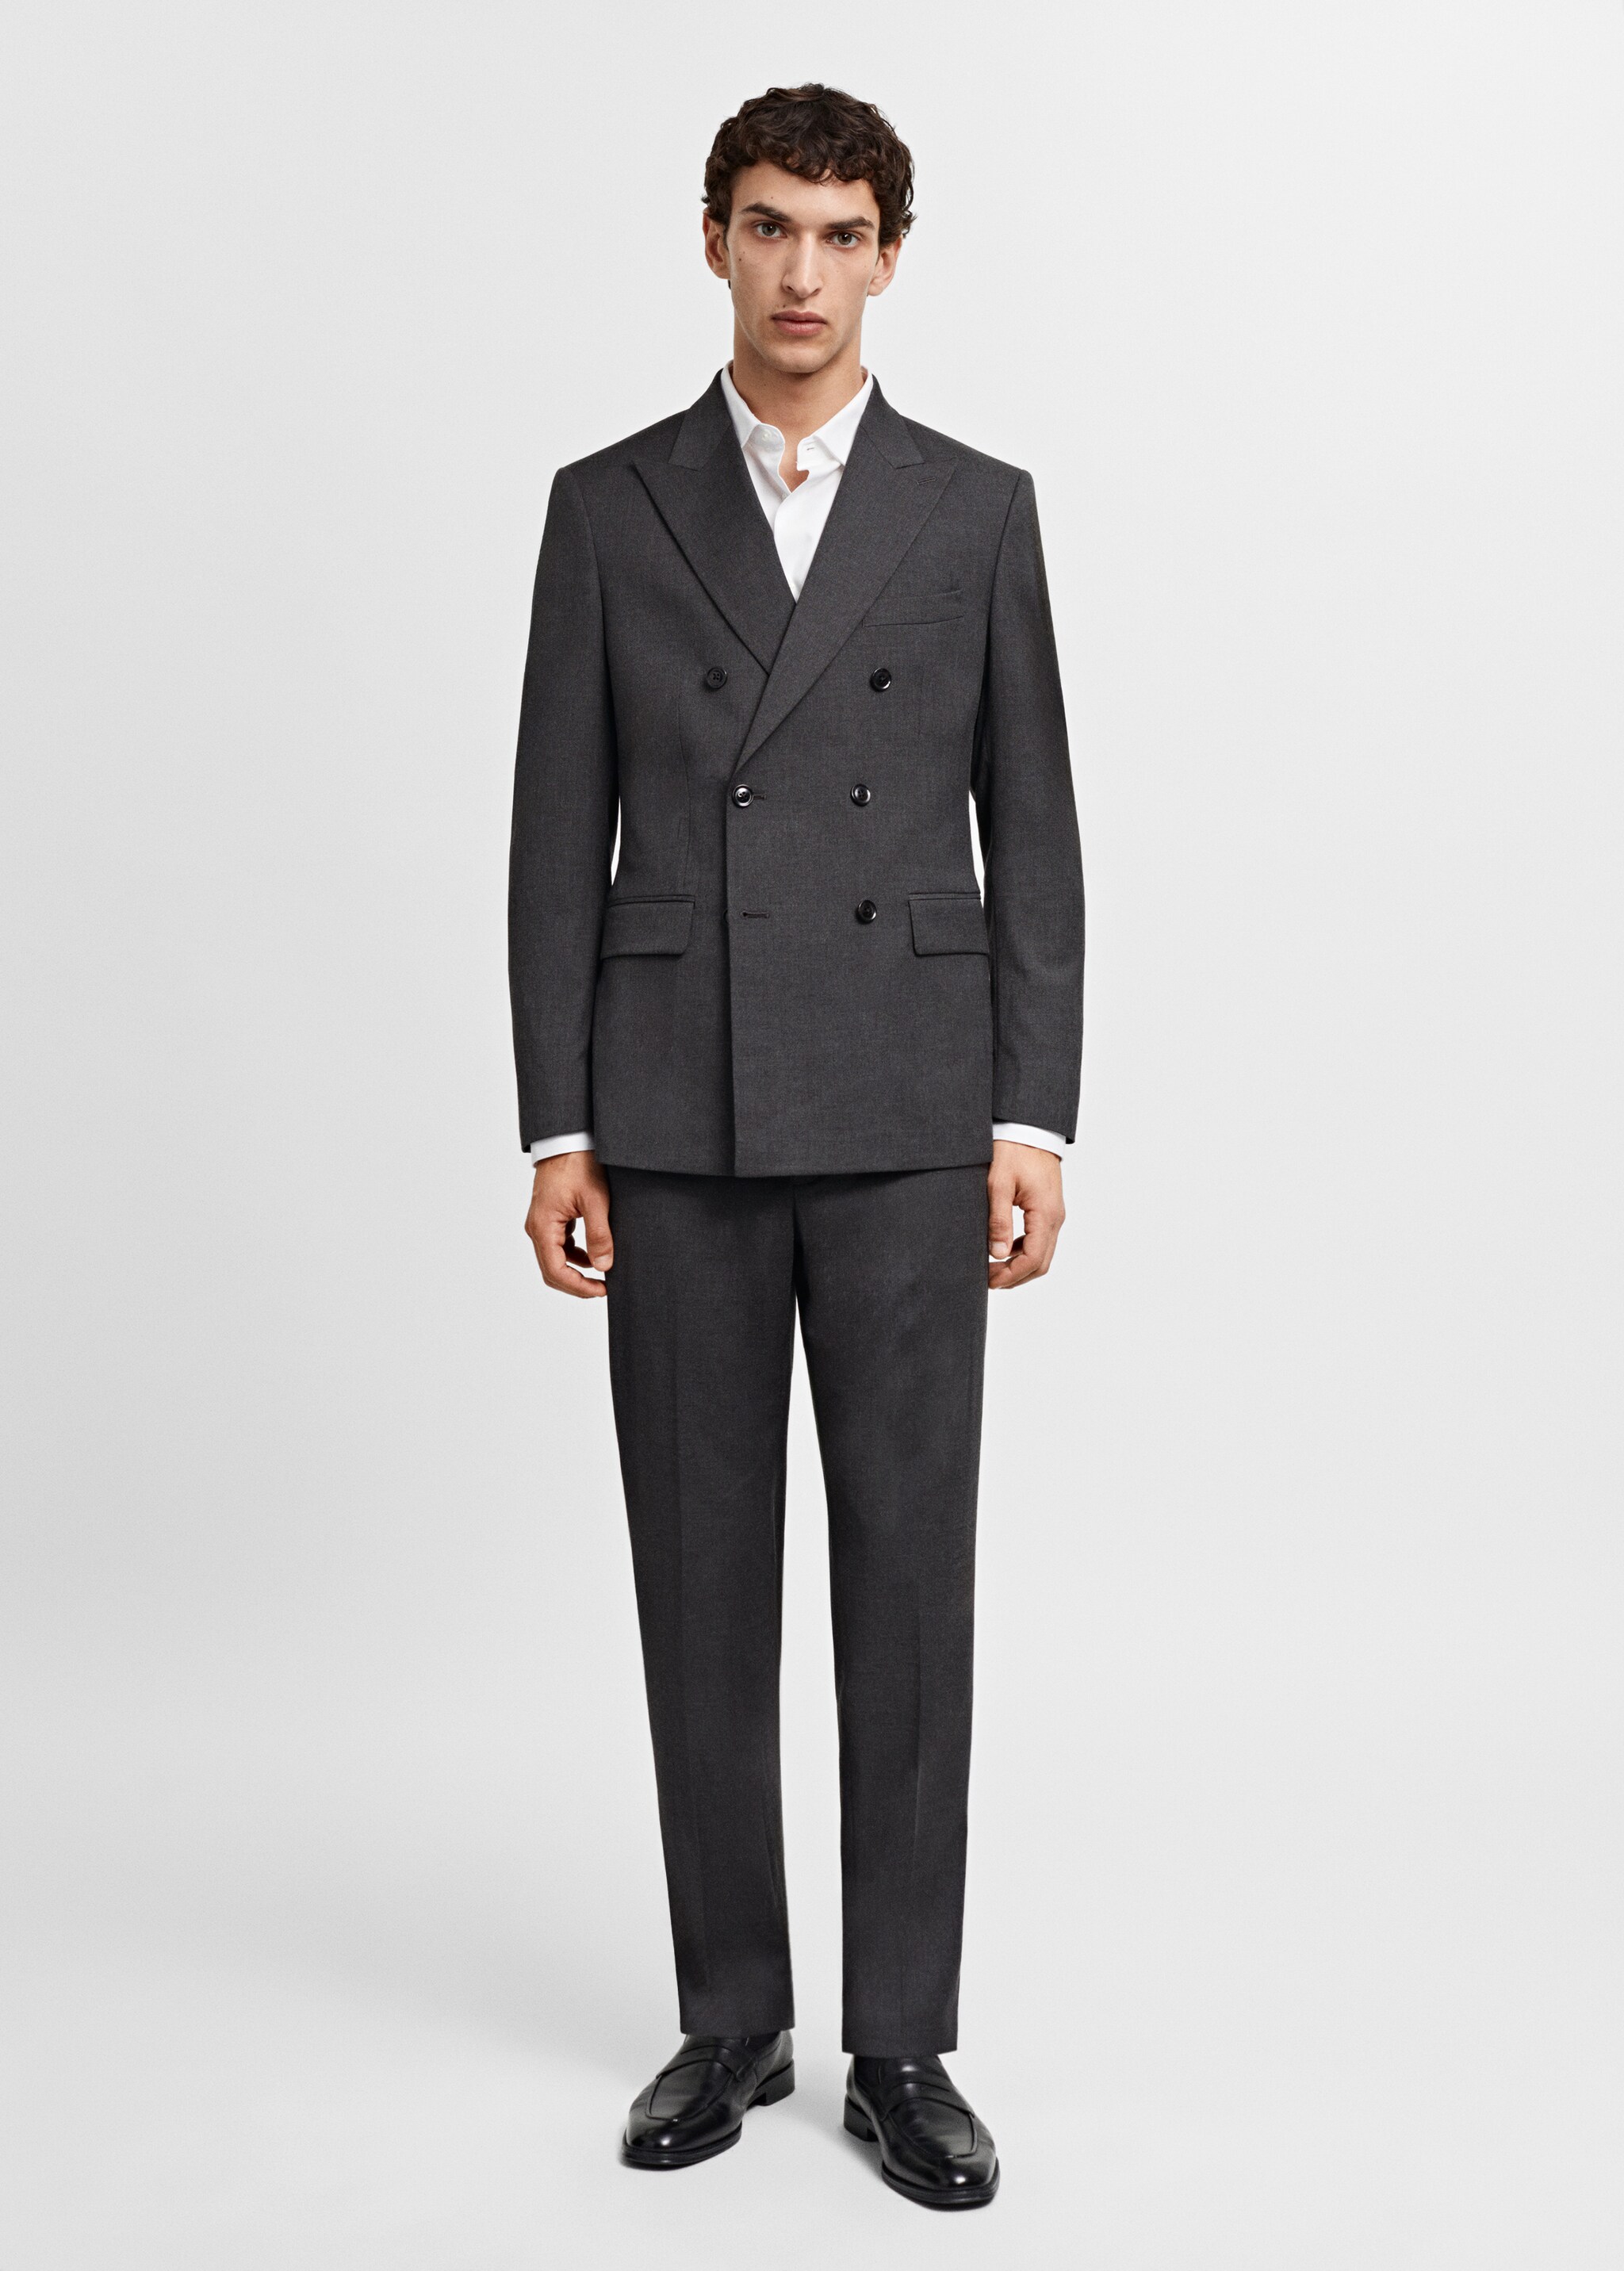 Slim fit double-breasted suit blazer - General plane